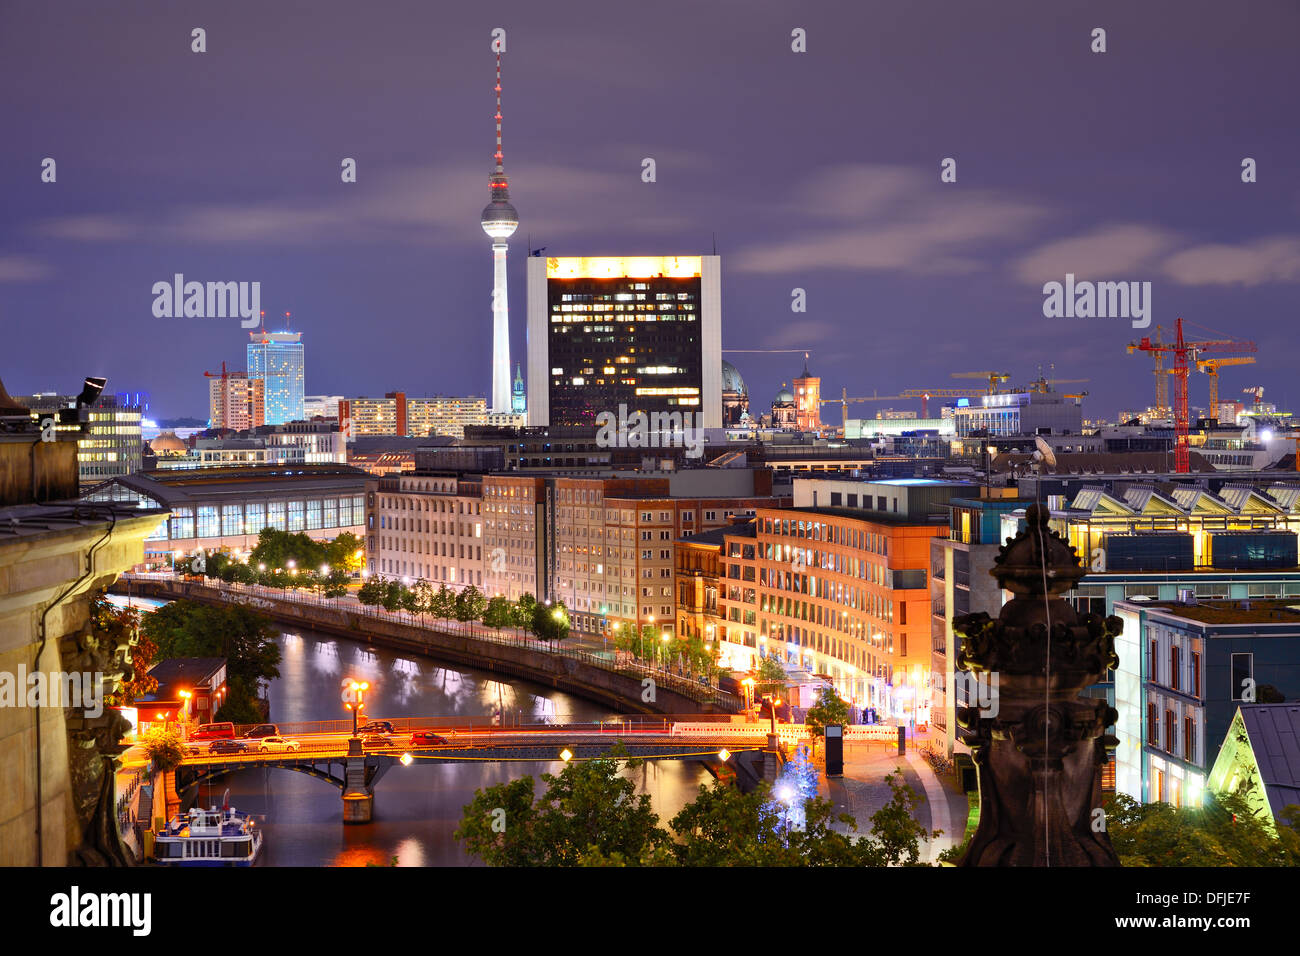 Berlin, Germany viewed from above the Spree River. Stock Photo